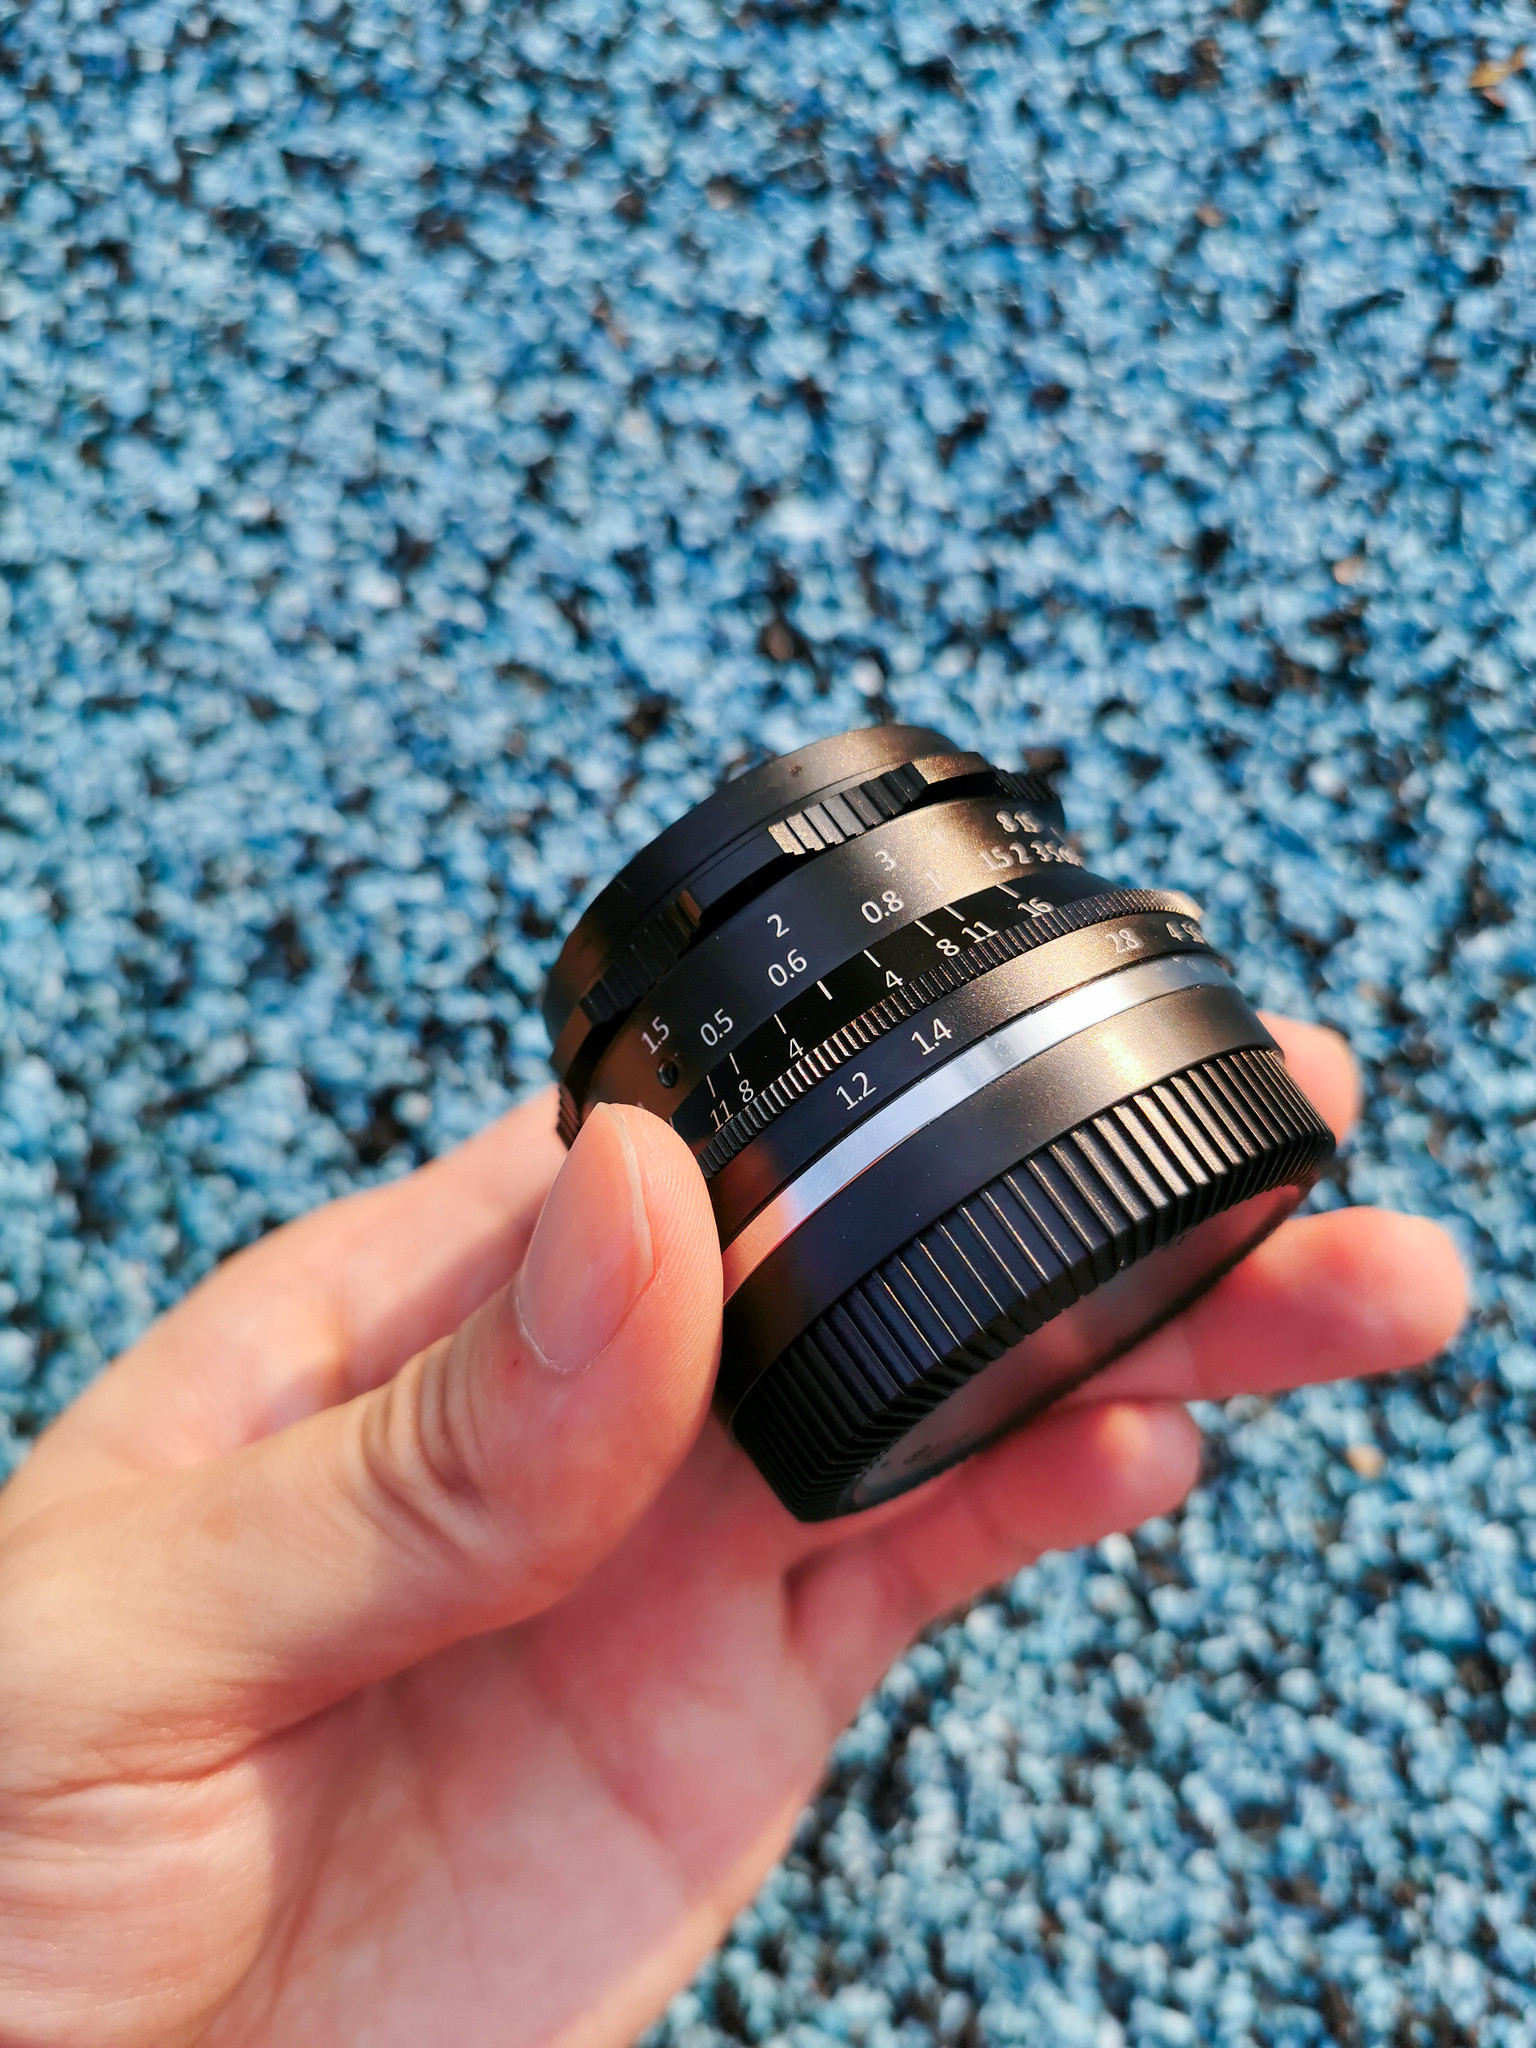 Patch mild buurman Bokeh in a pocket | Review of the 7Artisans 35mm f1.2 lens for Fujifilm  X-mount – KeithWee | Photography